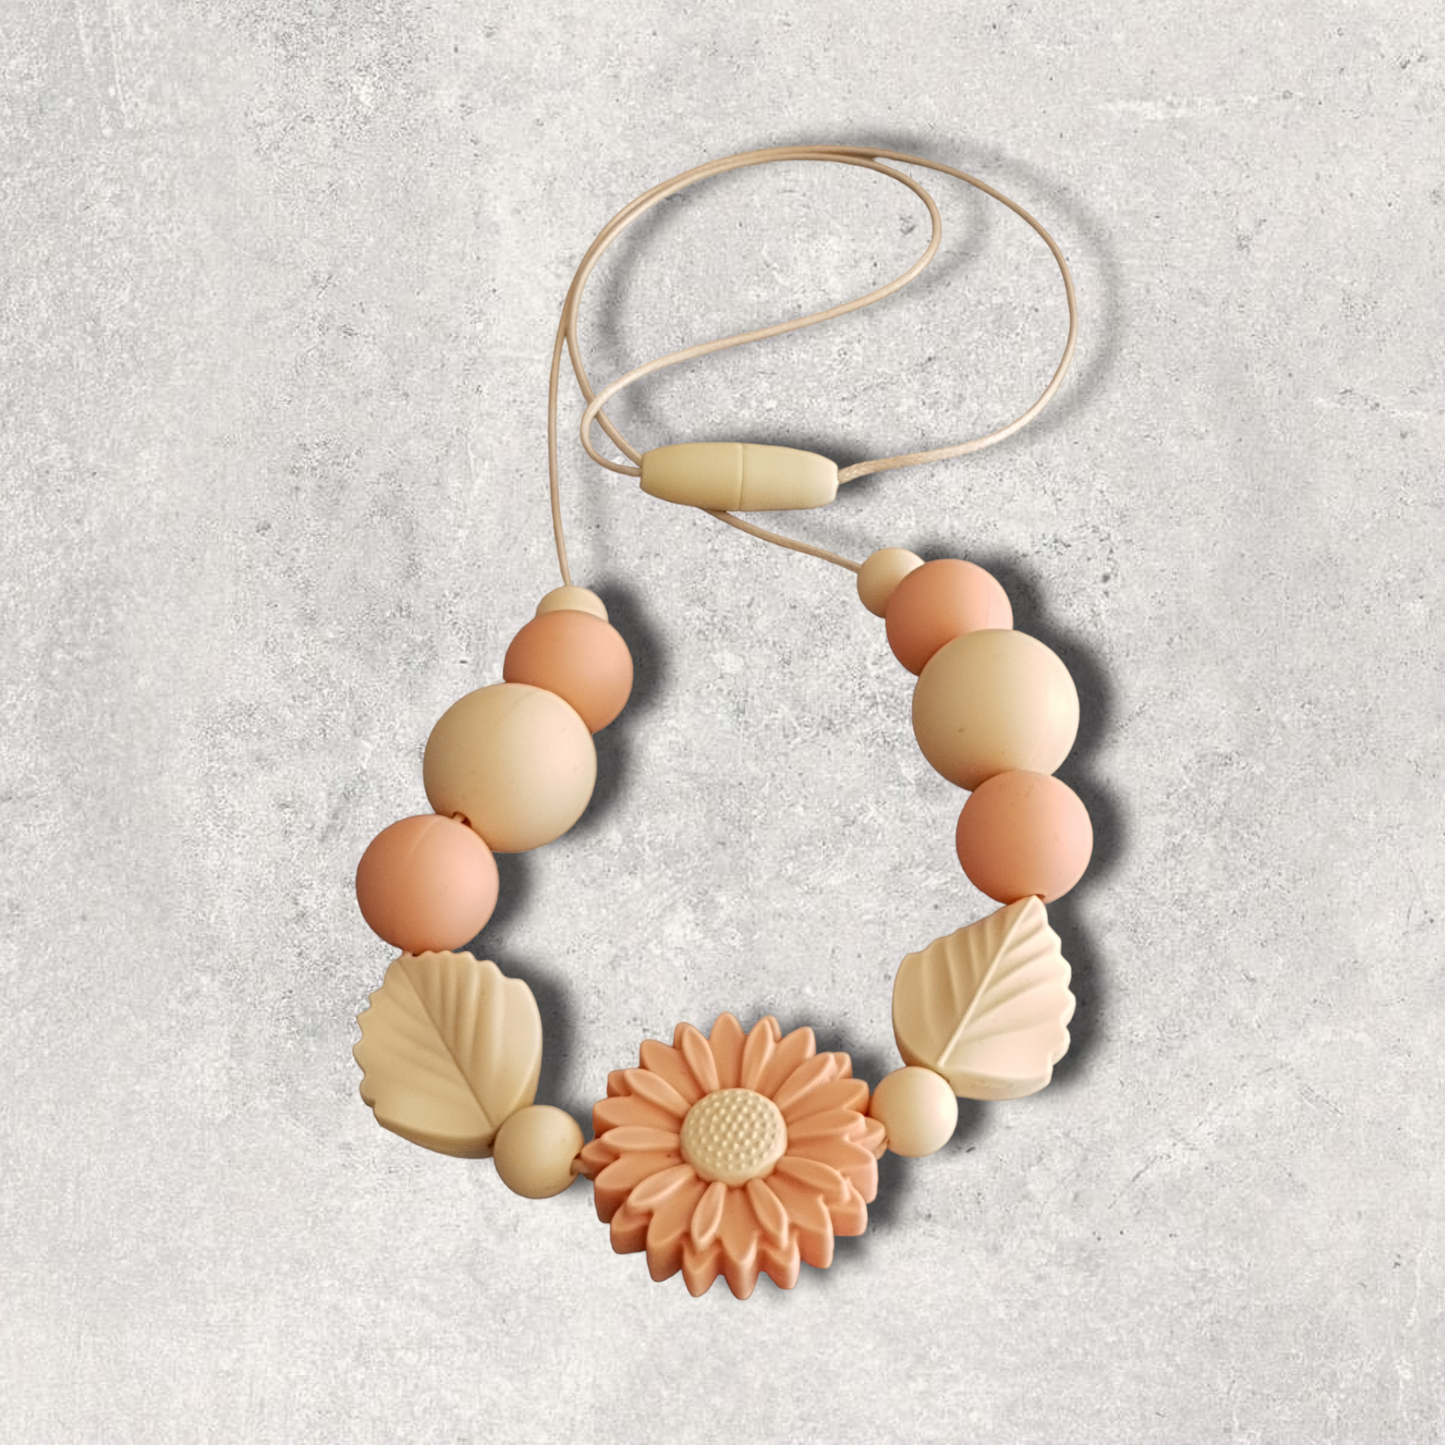 Daisy and Leaf Silicone Bead Necklace in Cream Peach | Handmade Necklace | Jewellery